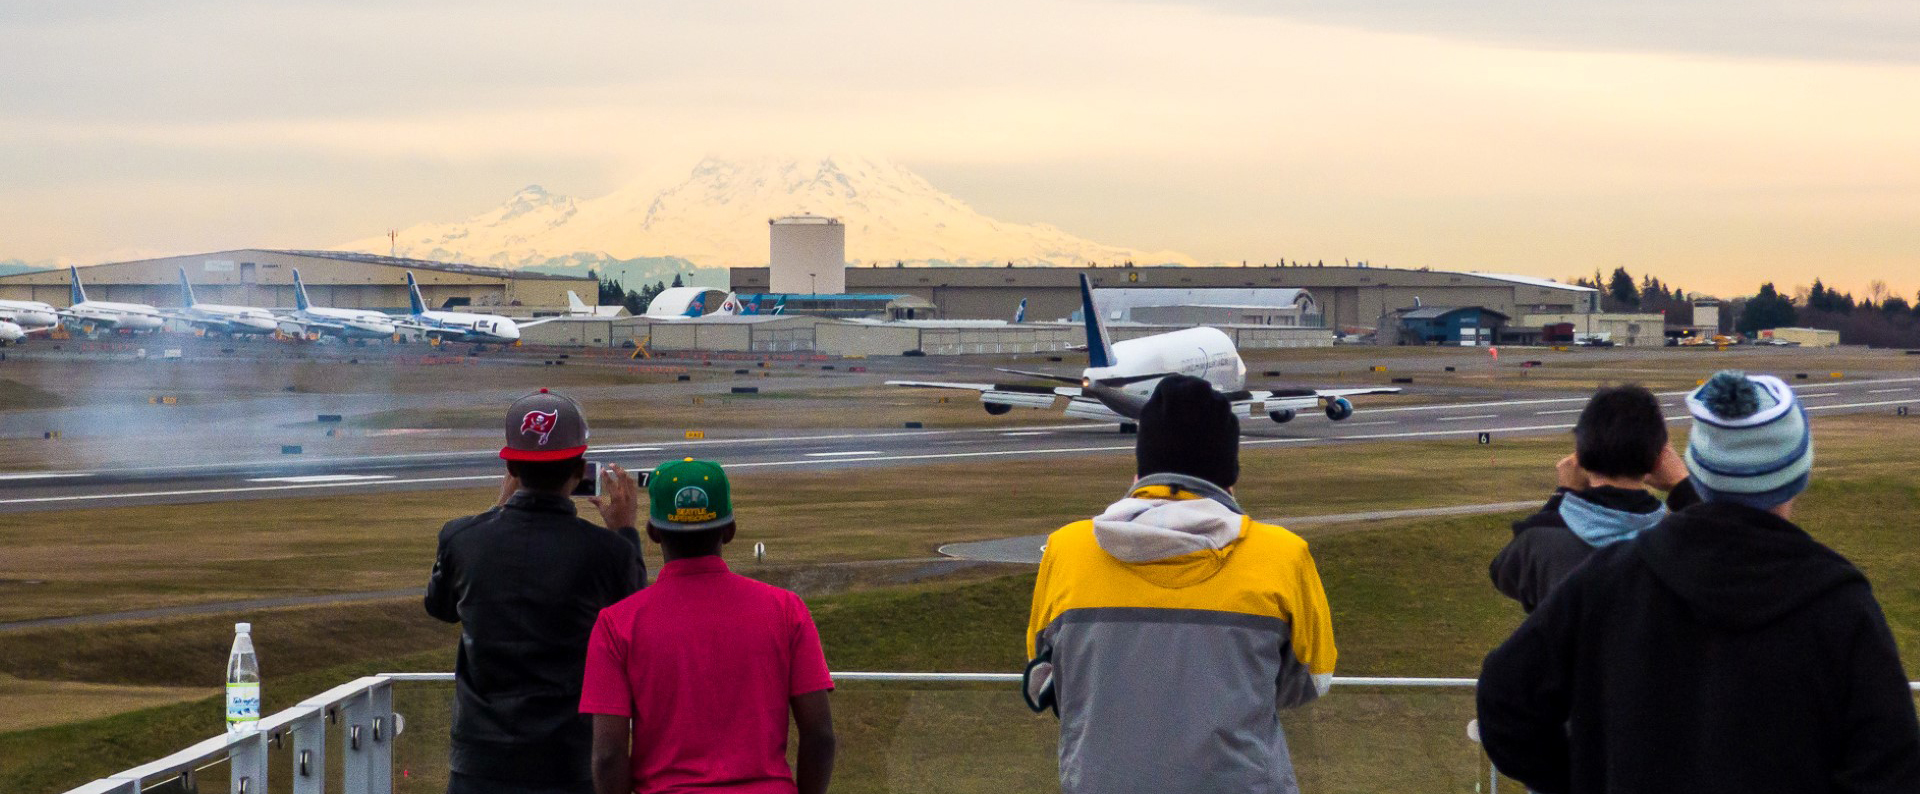 Visitors on the Future of Flight Strato Deck watch as a Dreamlifter lands at Paine Field. The Dreamlifter is specially designed to transport huge, prefabricated parts of the 787 Dreamliner that are manufactured elsewhere (such as the wings), and deliver them to Paine Field for final assembly. Joe Kunzler photo.